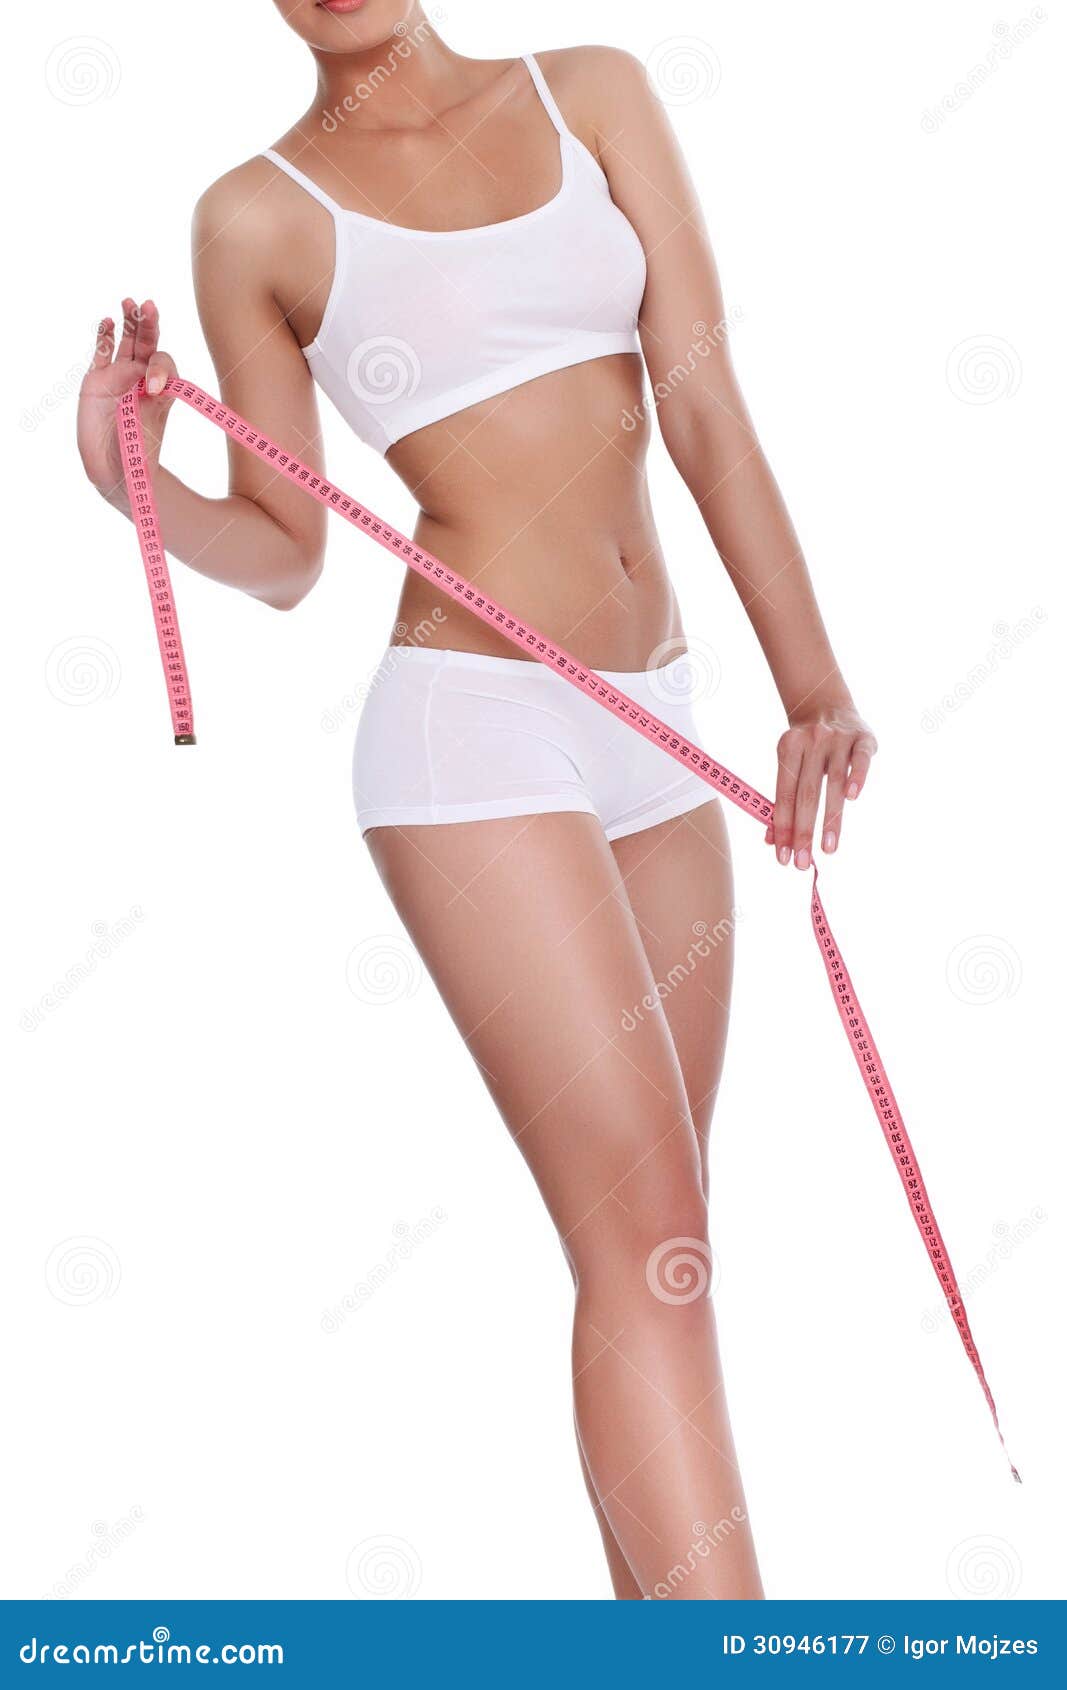 Measuring Waist with Measuring Tape Stock Image - Image of body